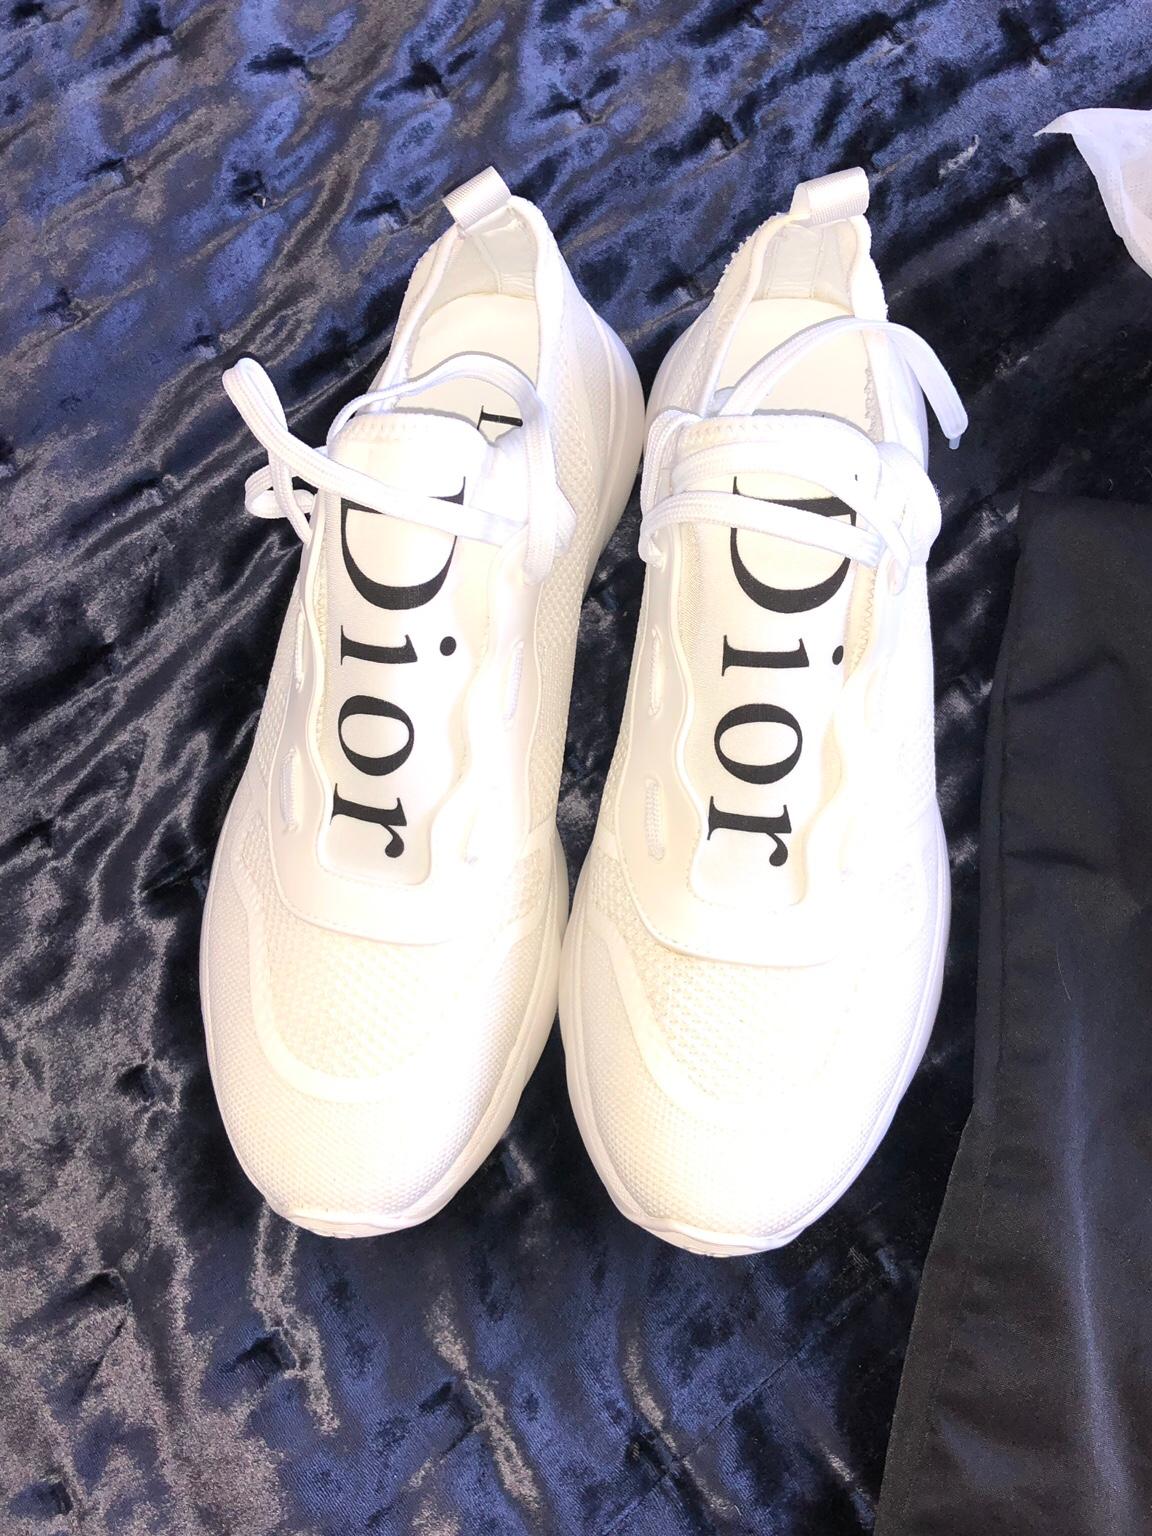 Dior b21 runners size 9 in London for 